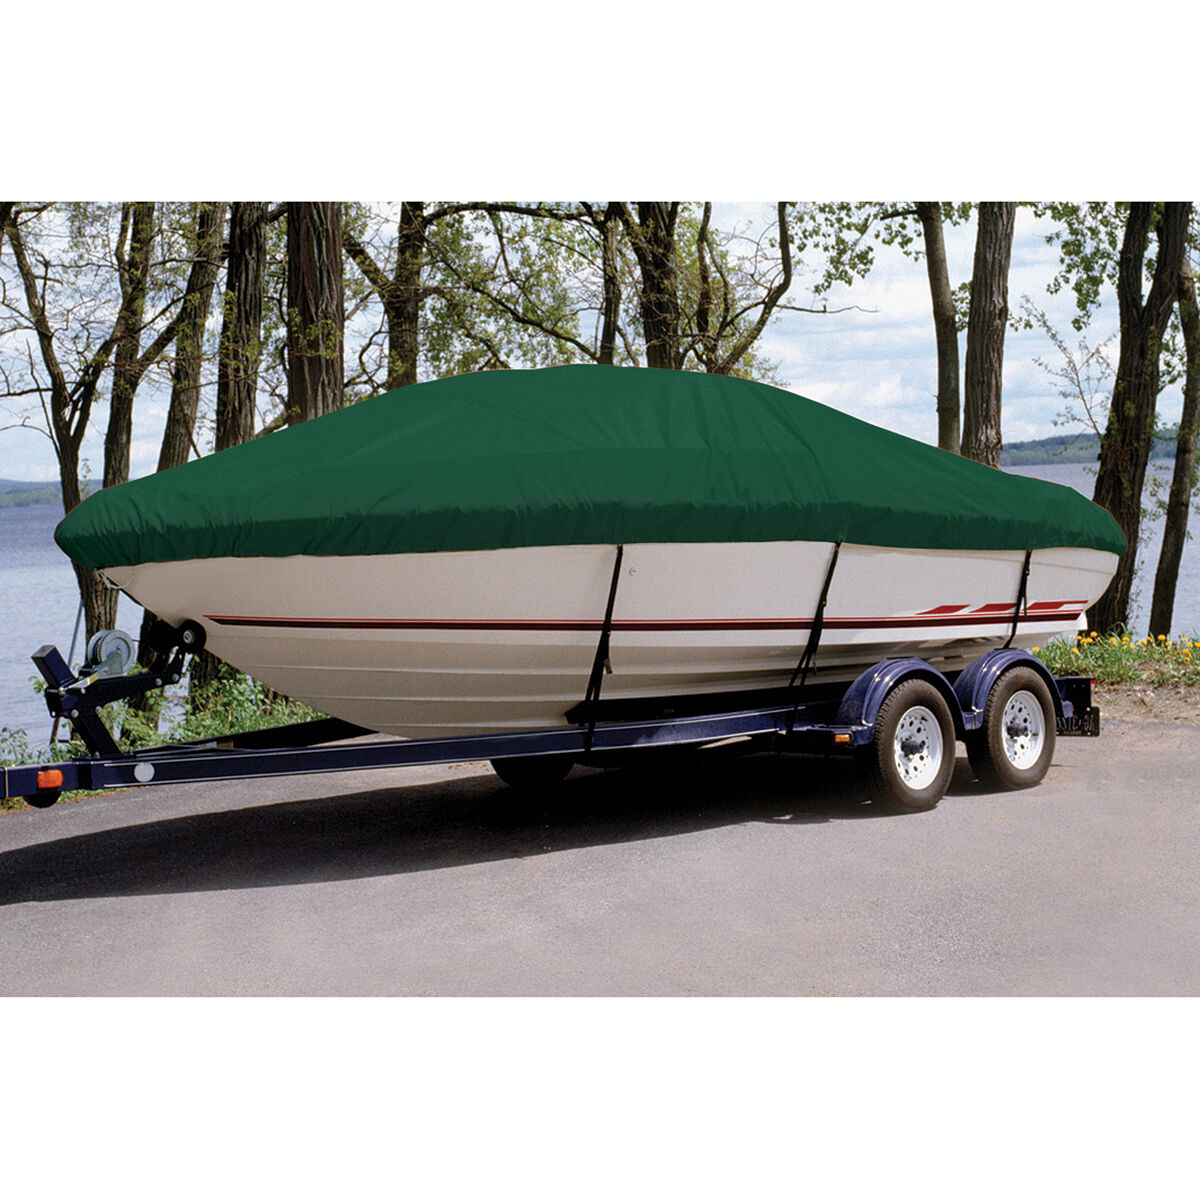 Taylor Made Trailerite Ultima Cover for 96-04 Ski Centurion Elite Bow Rider/V-Dr Boat Cover in Green Polyester